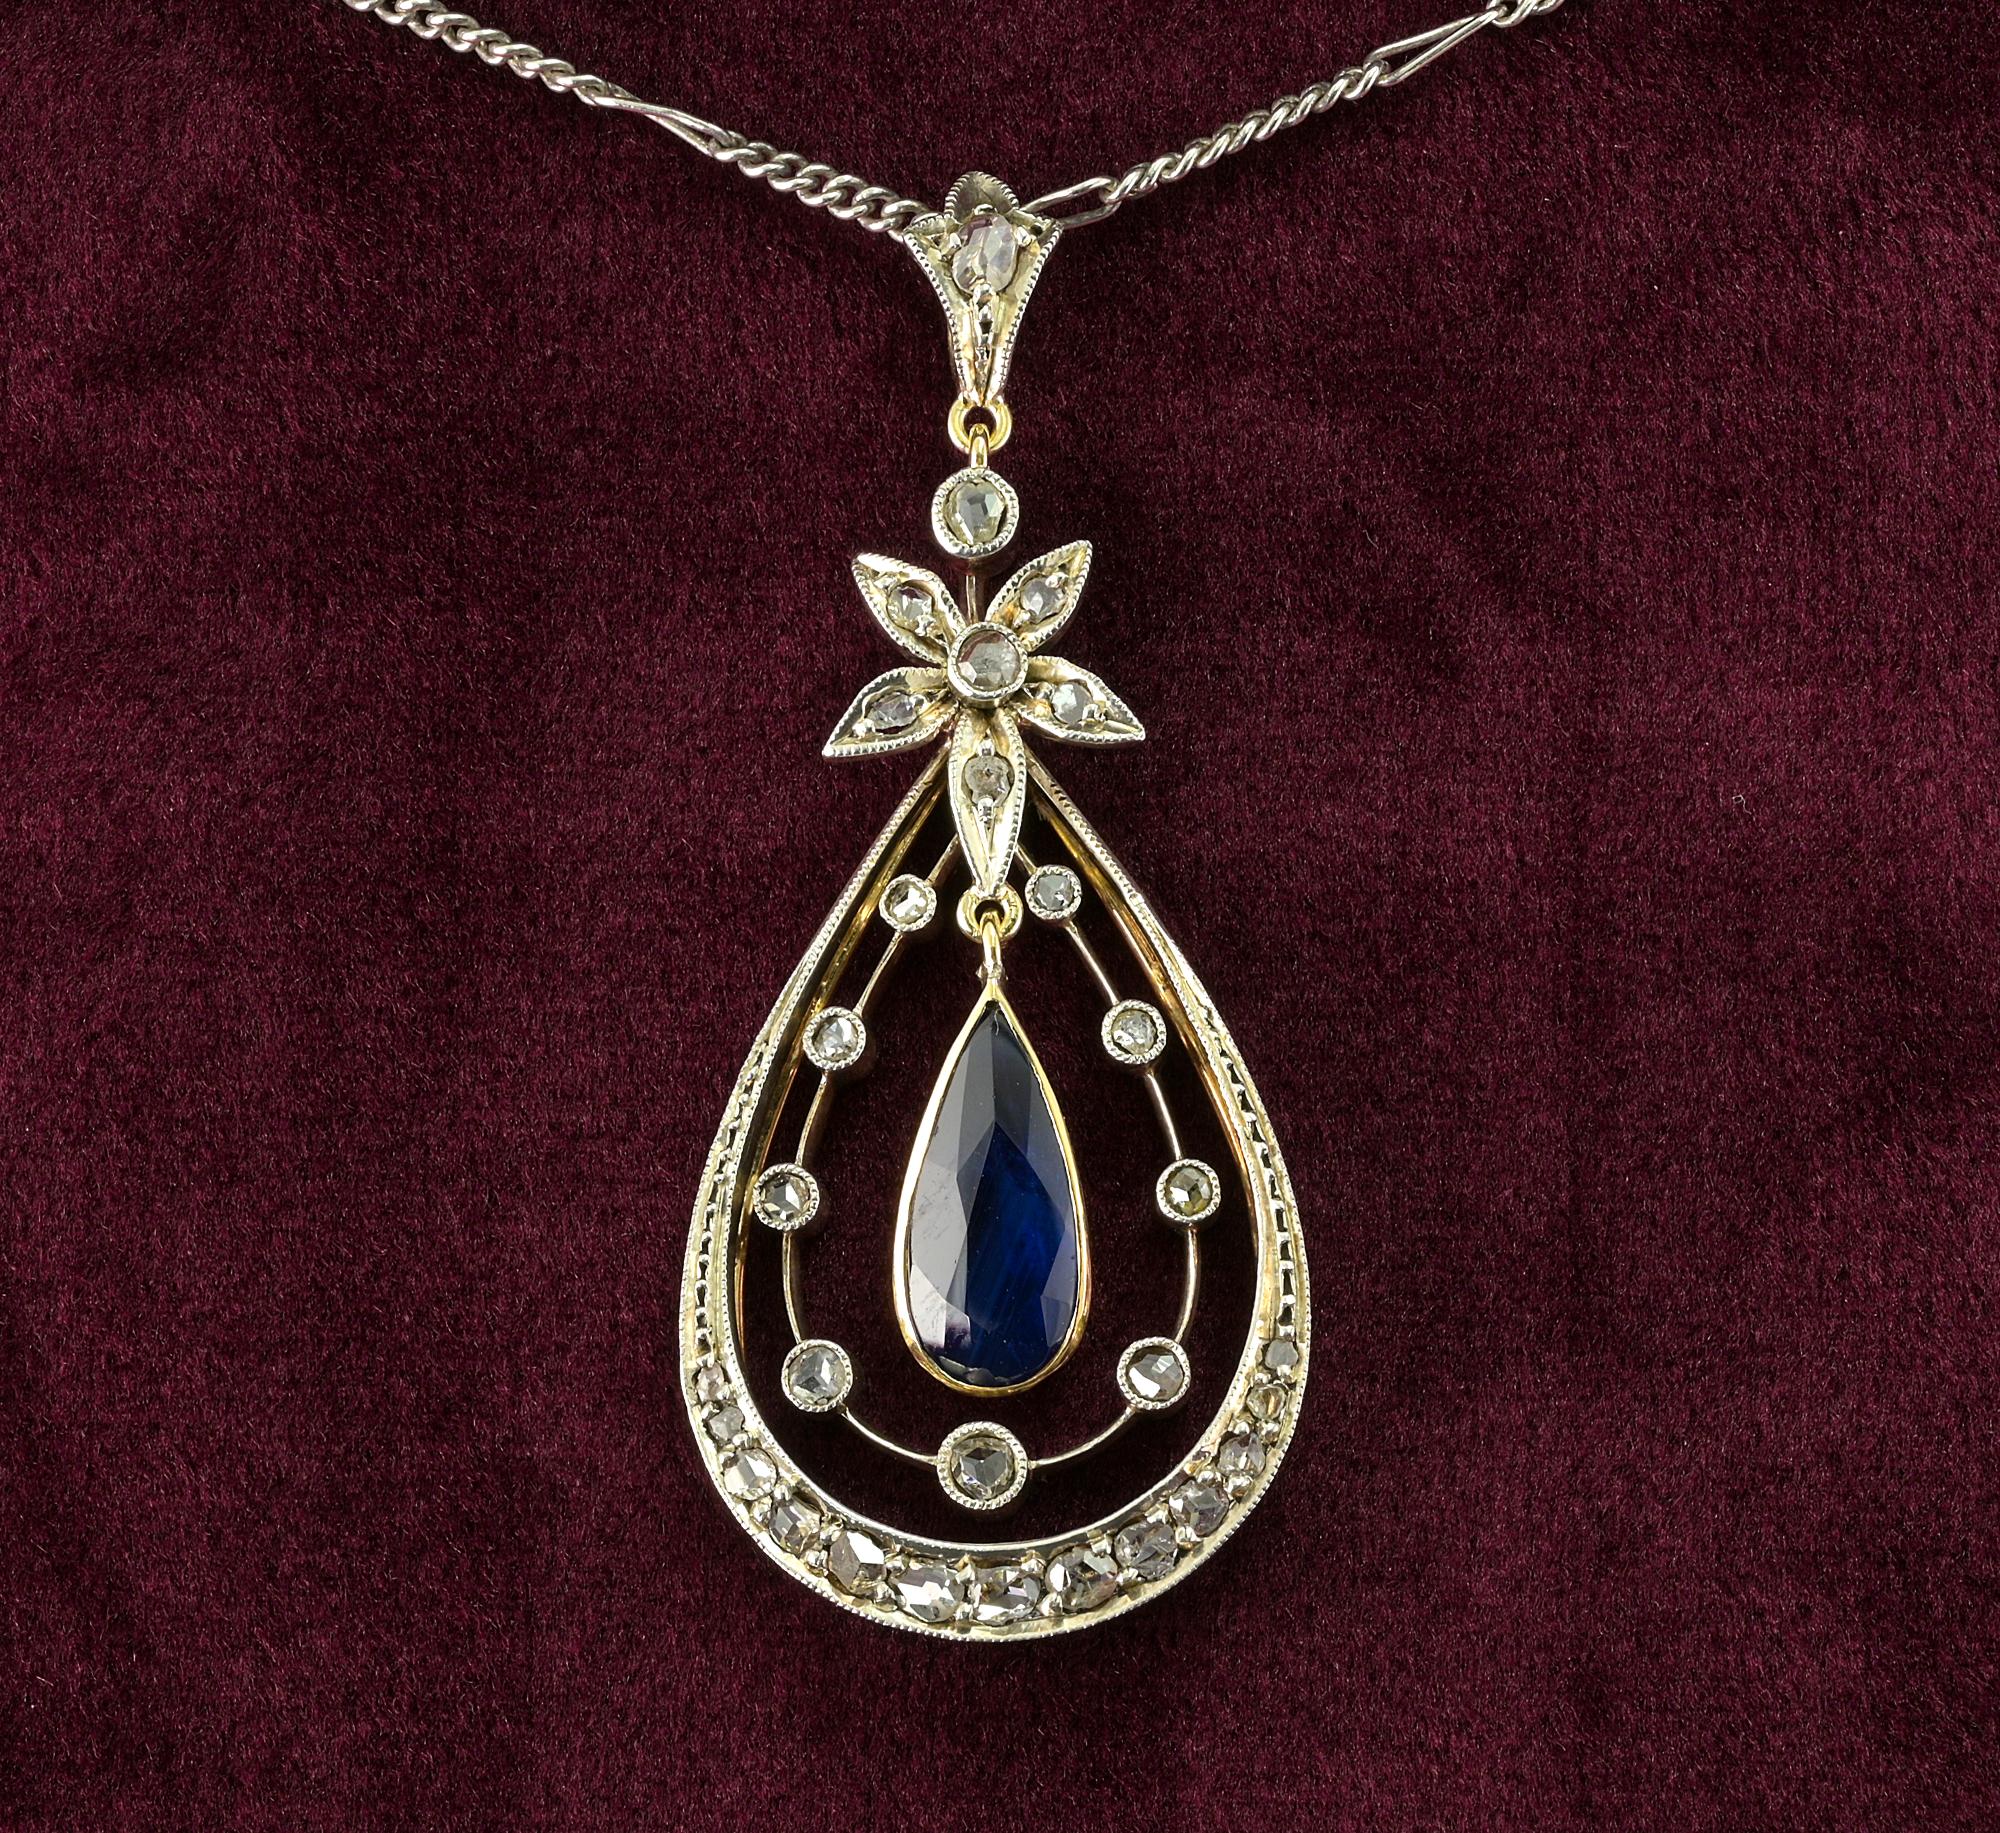 This charming Edwardian era pendant is 1905 ca
Design is made of a tri -lobed bail attached to a lovely daisy flower which stands on the three oval dangling sections one into the other
Center Sapphire is natural untreated approx. 1.20 Ct (12,3 x 5.6